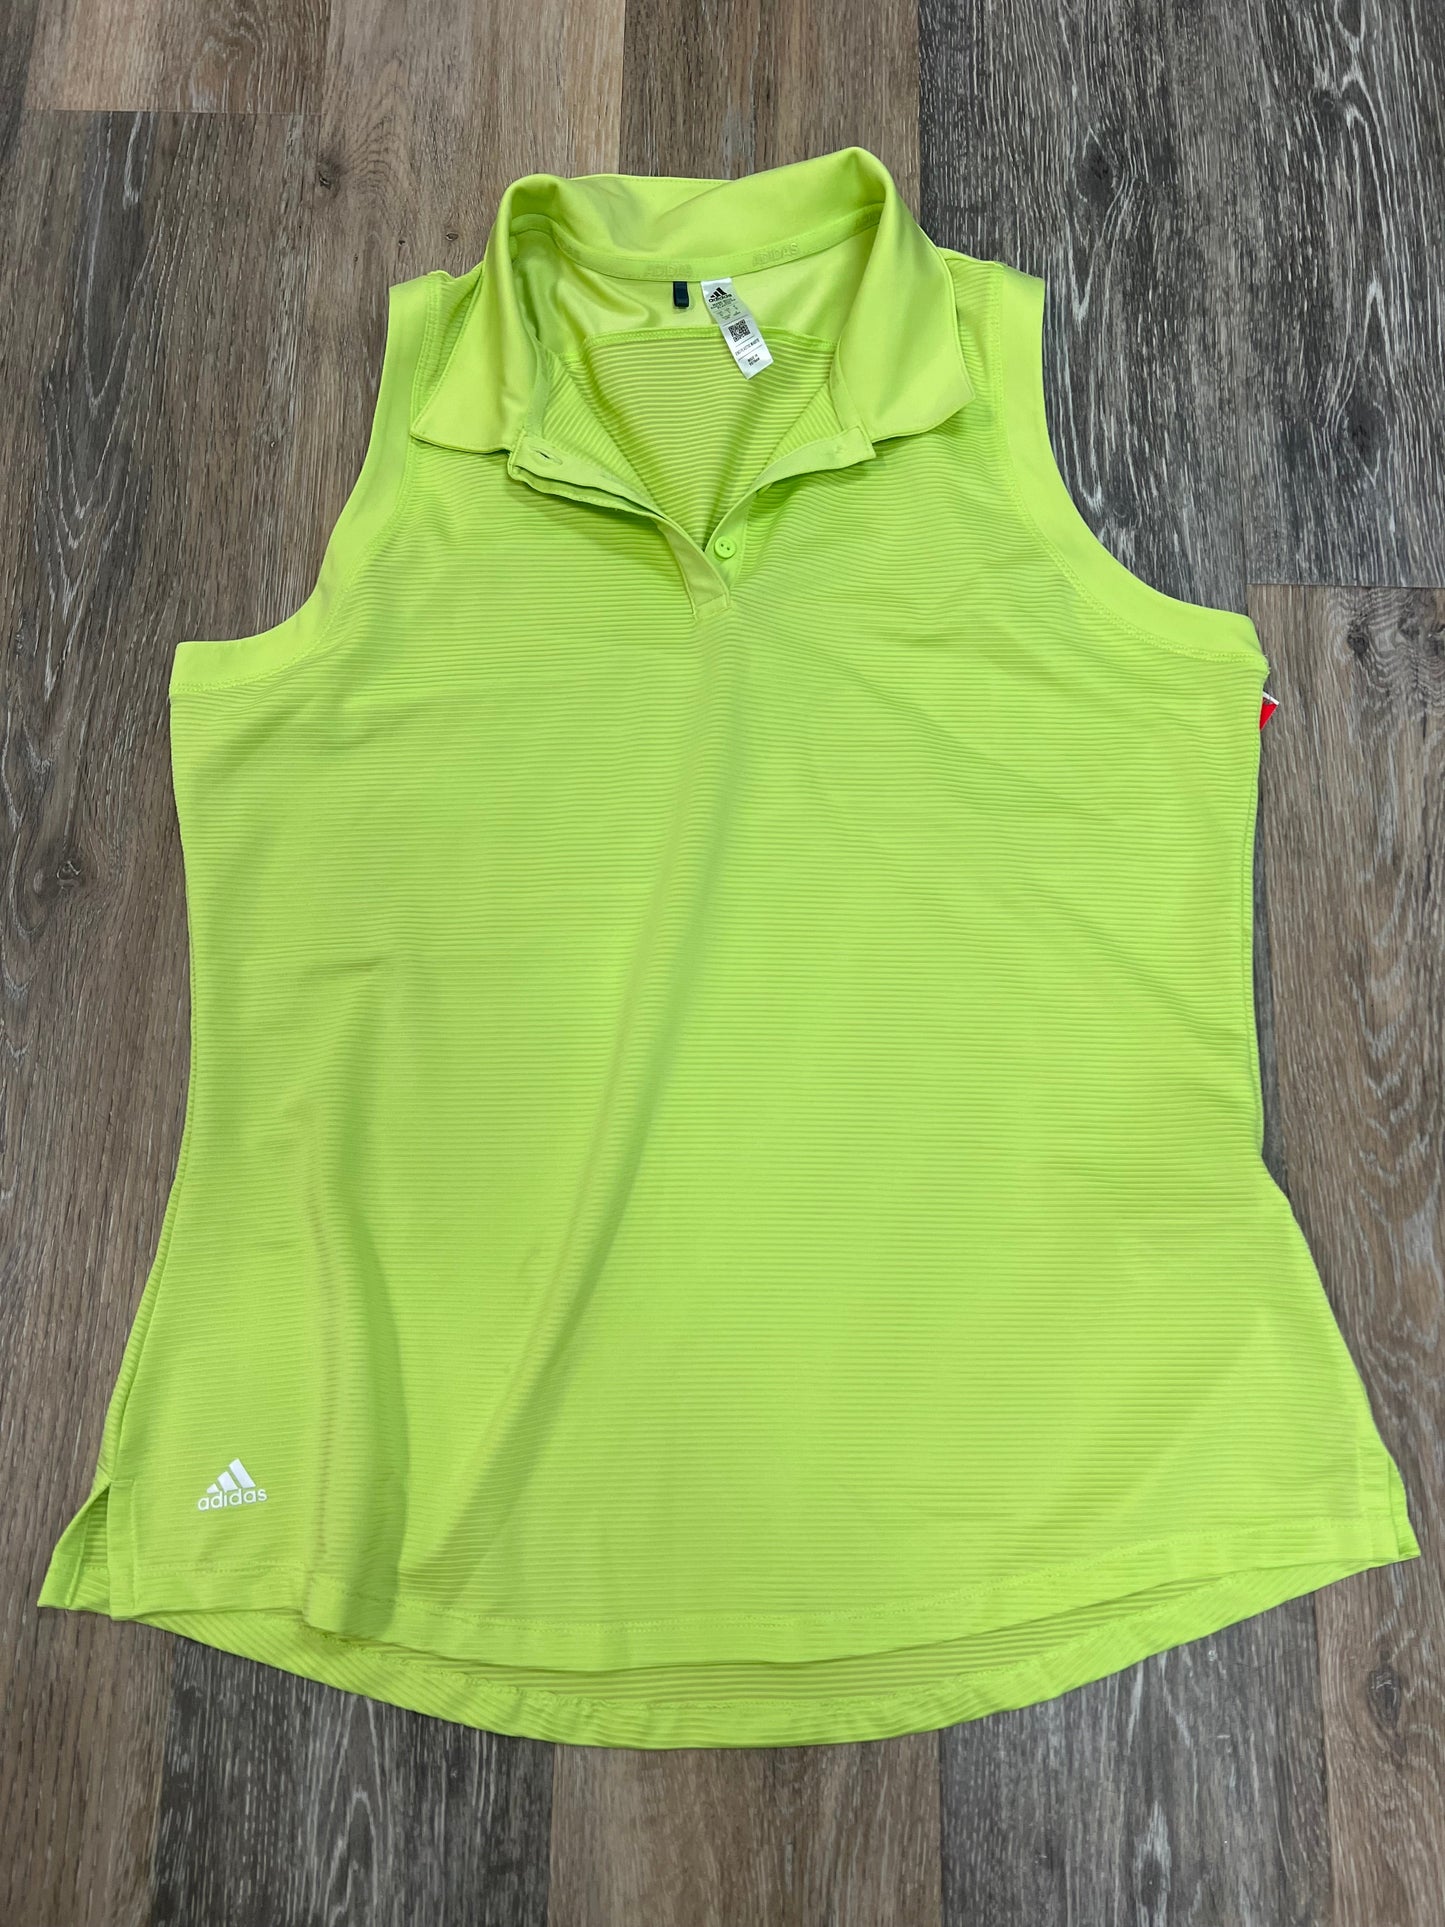 Green Athletic Tank Top Adidas, Size L